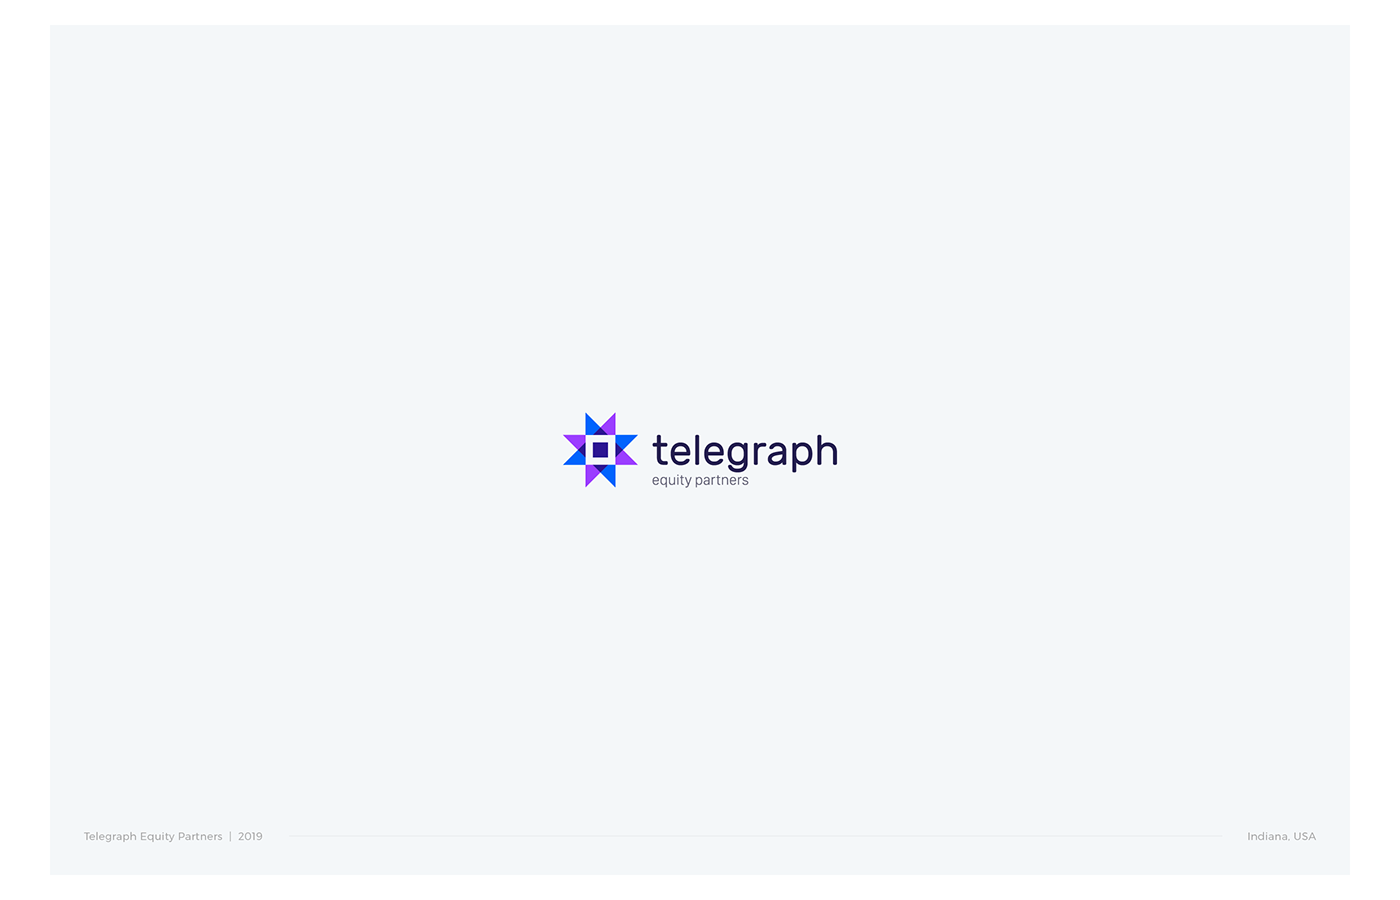 Blue and purple logo mark with a custom typography combined.